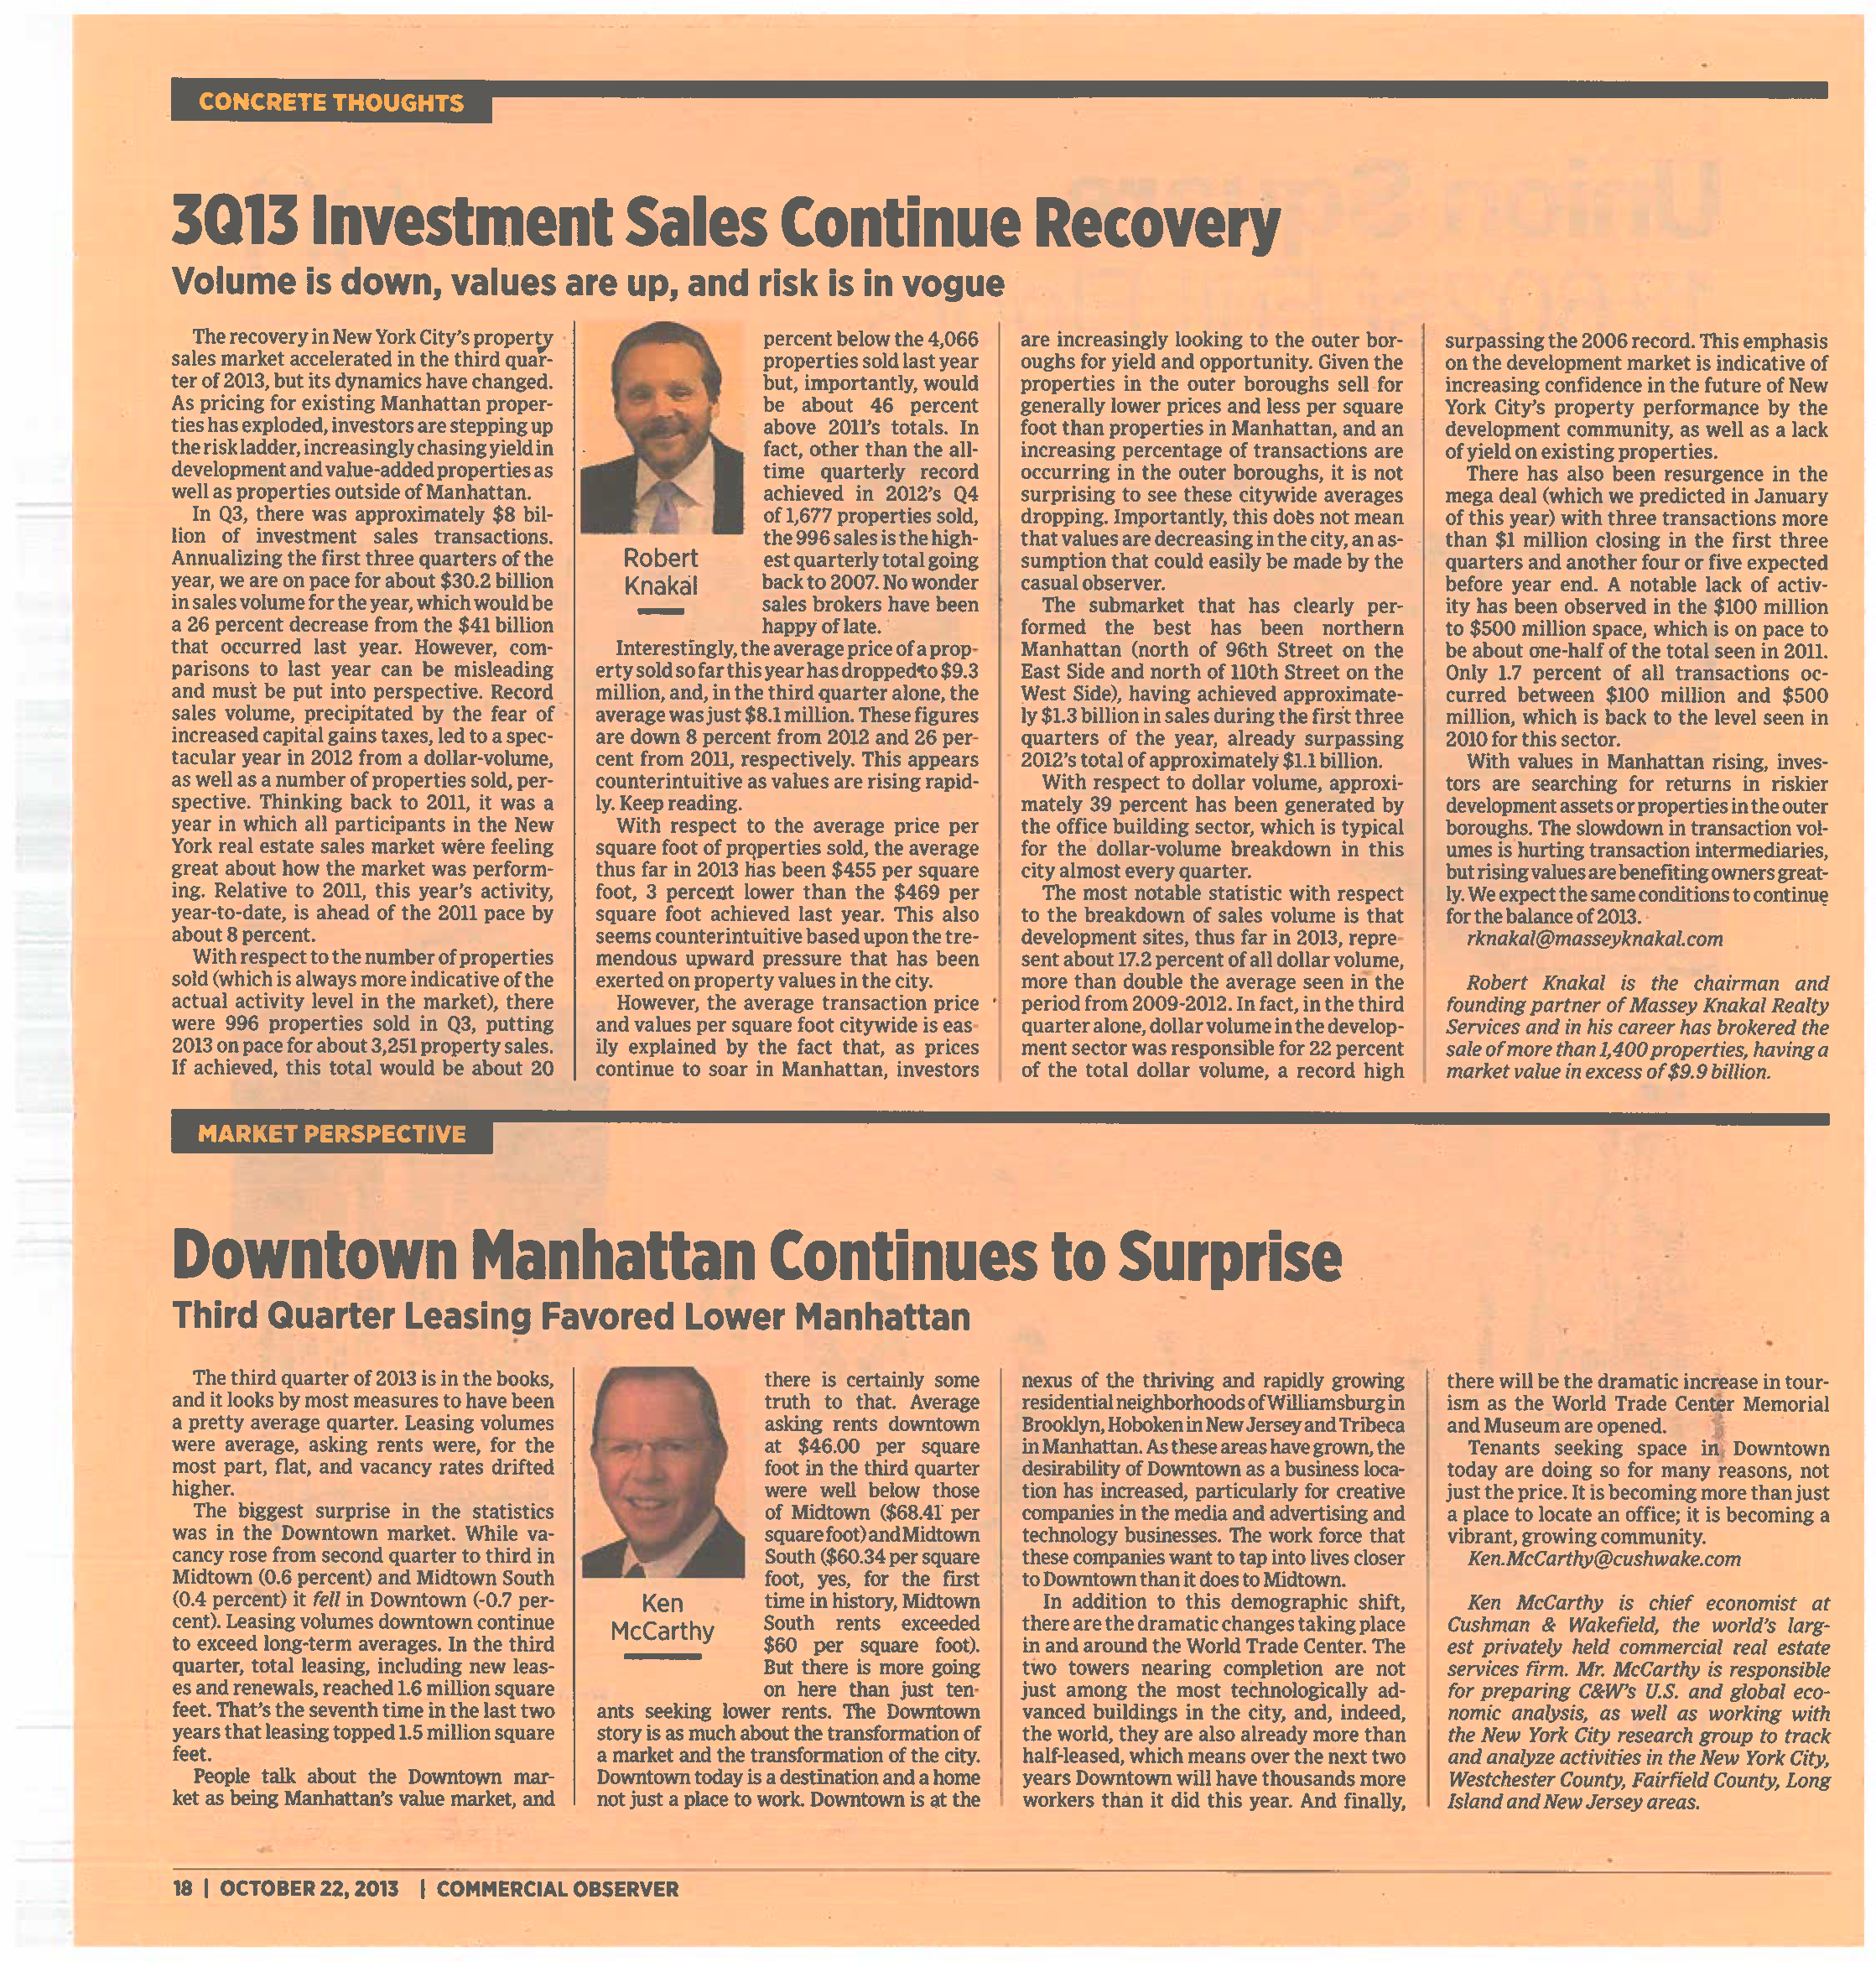 Concrete Thoughts - 3Q13 Investment Sales Continue Recovery - Oct 22 2013